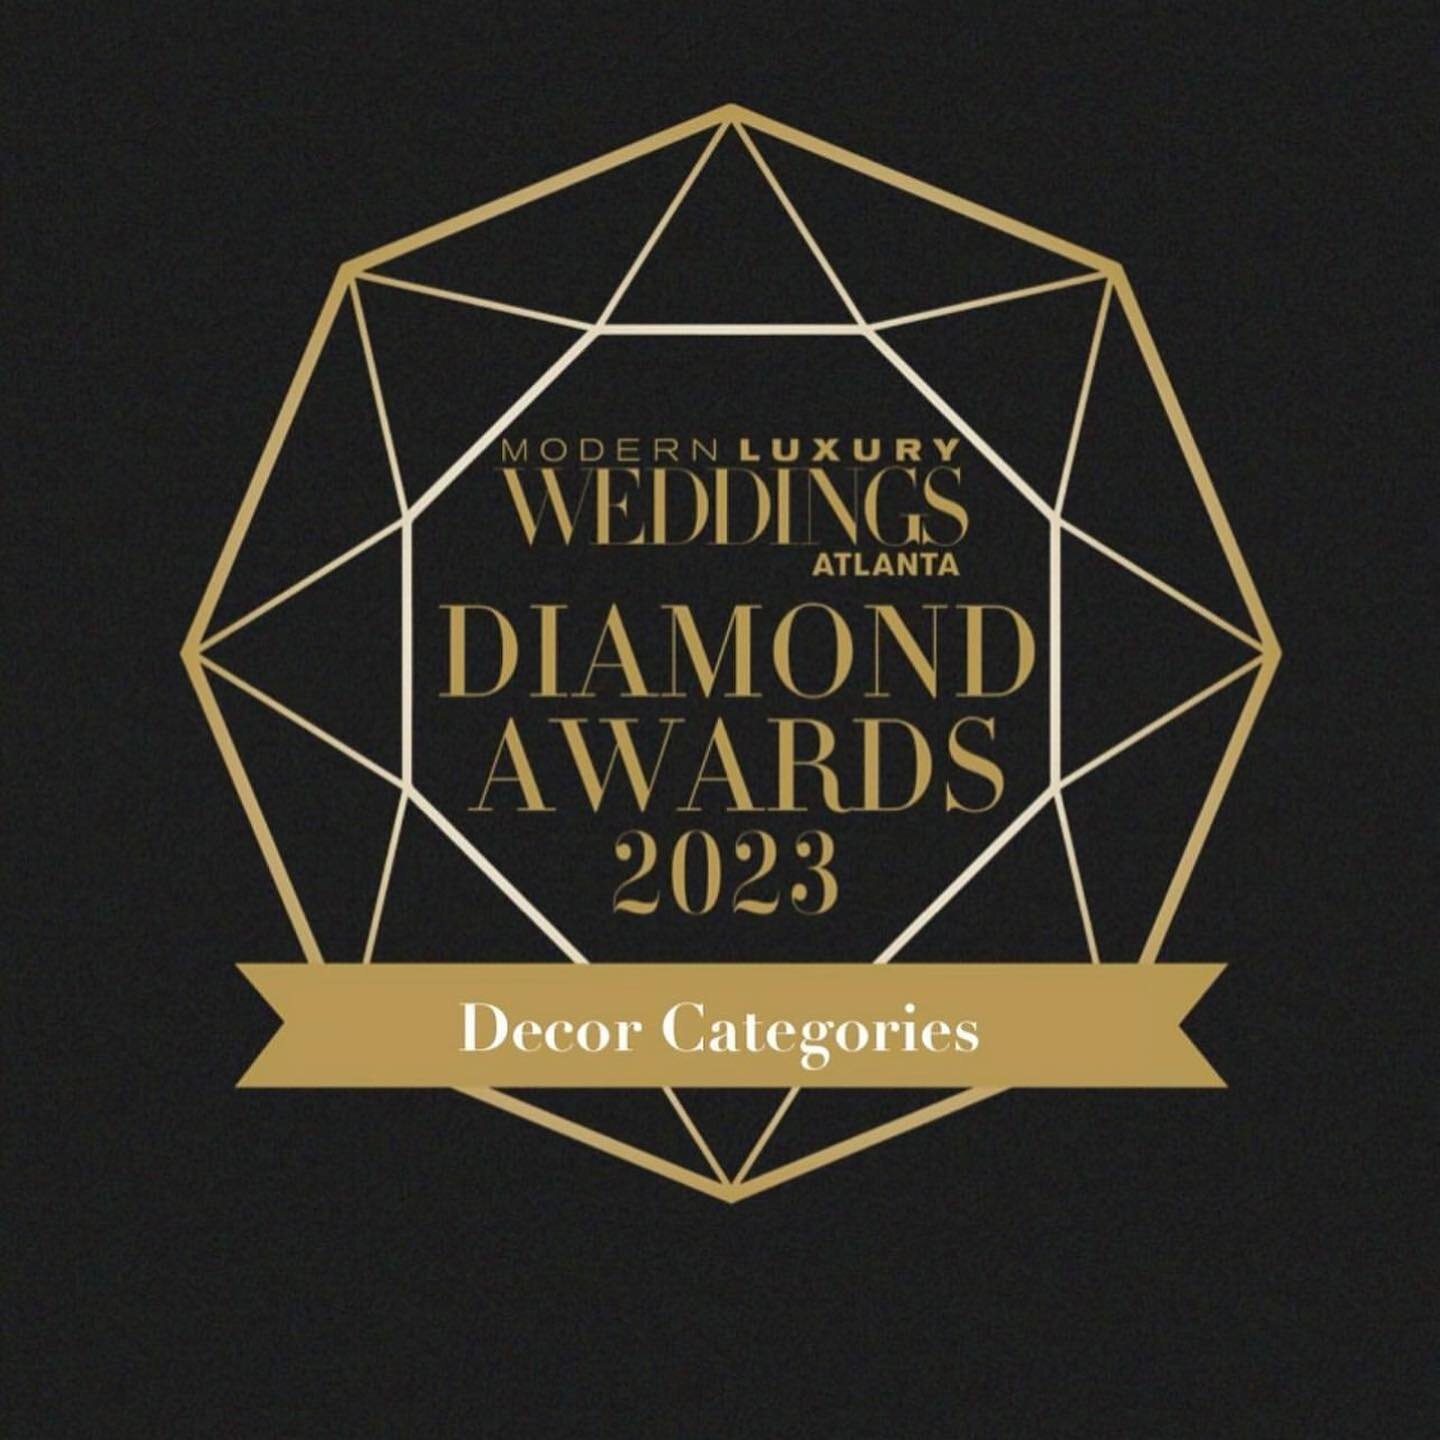 Happy Friday, everyone! We are beyond excited and grateful to be nominated alongside these talented friends and vendors for this year's Diamond Awards! 💎
Check out the full list of nominees on @mlweddingsatl 
We can't wait for The Diamond Awards Gal